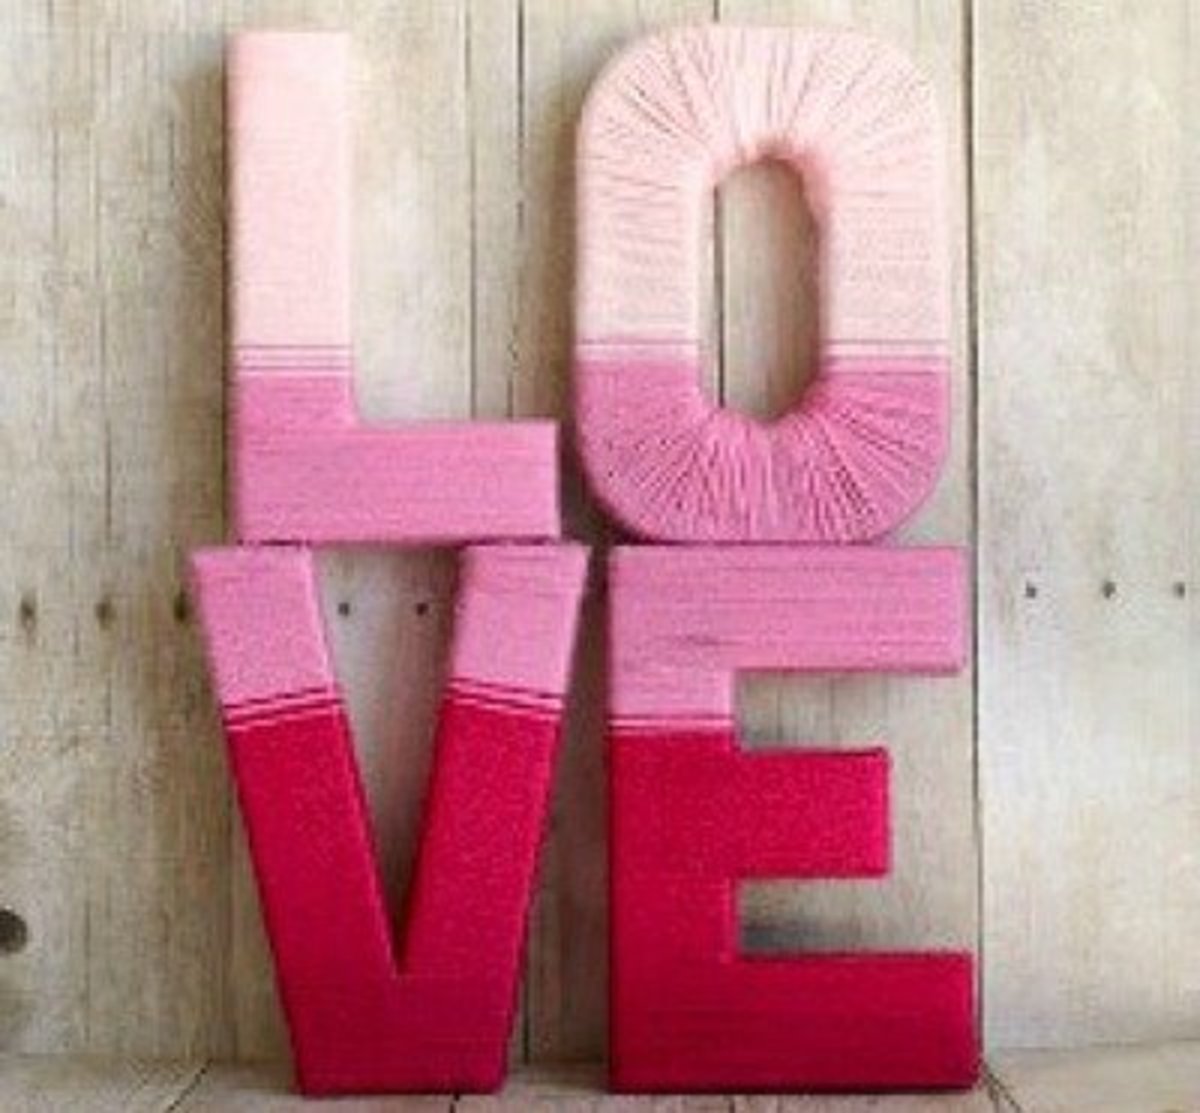 Yarn Wrapped Love Letters